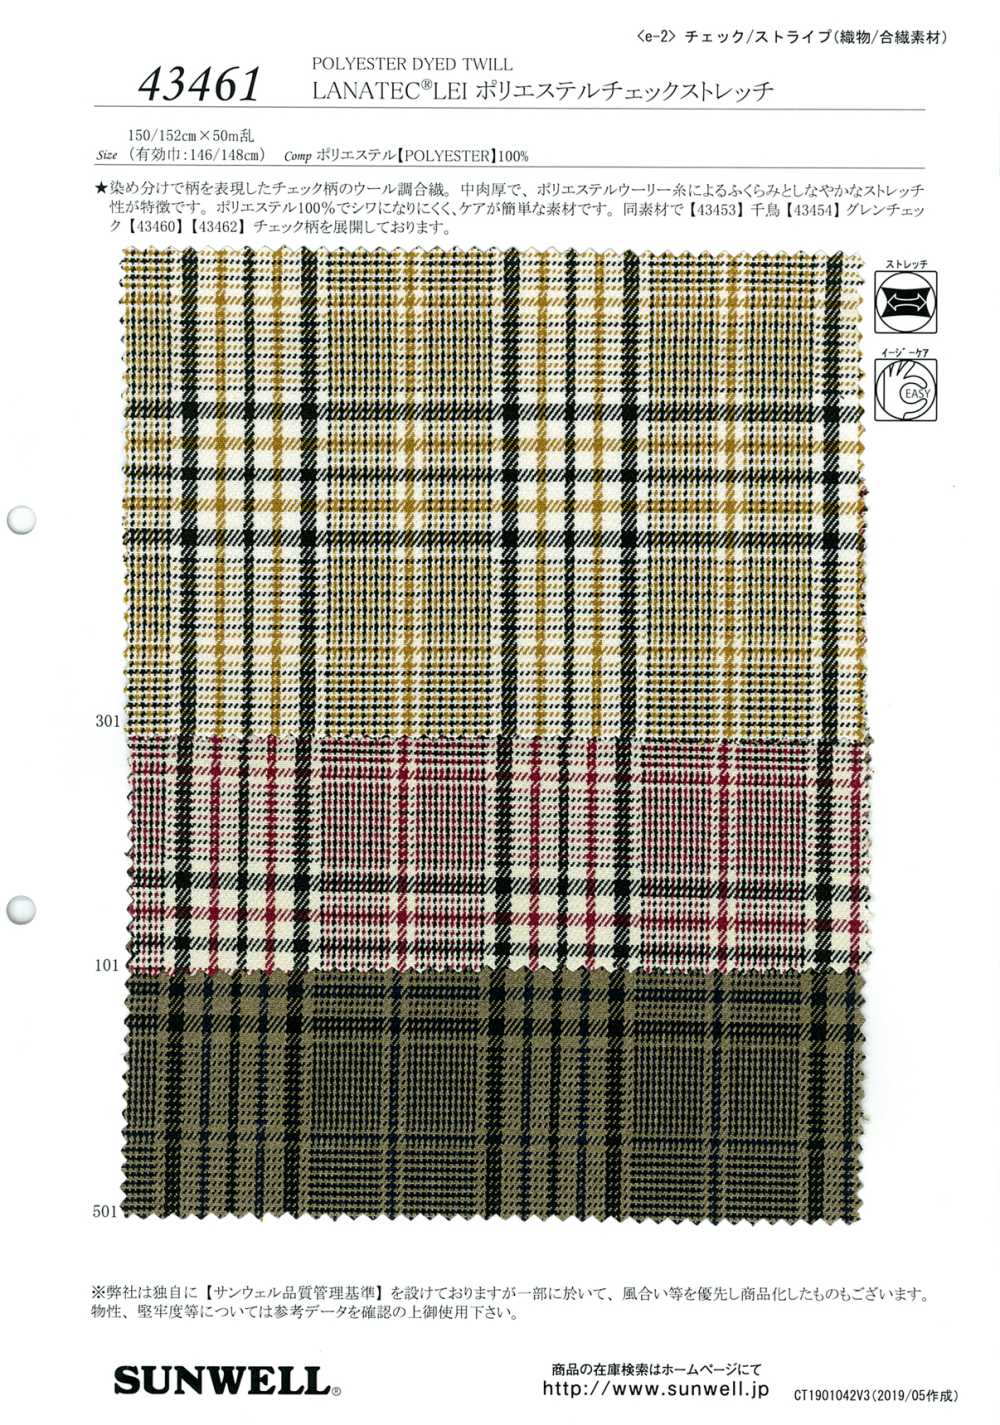 43461 [OUTLET] LANATEC (R) LEI Polyester Check Stretch[Textile / Fabric] SUNWELL